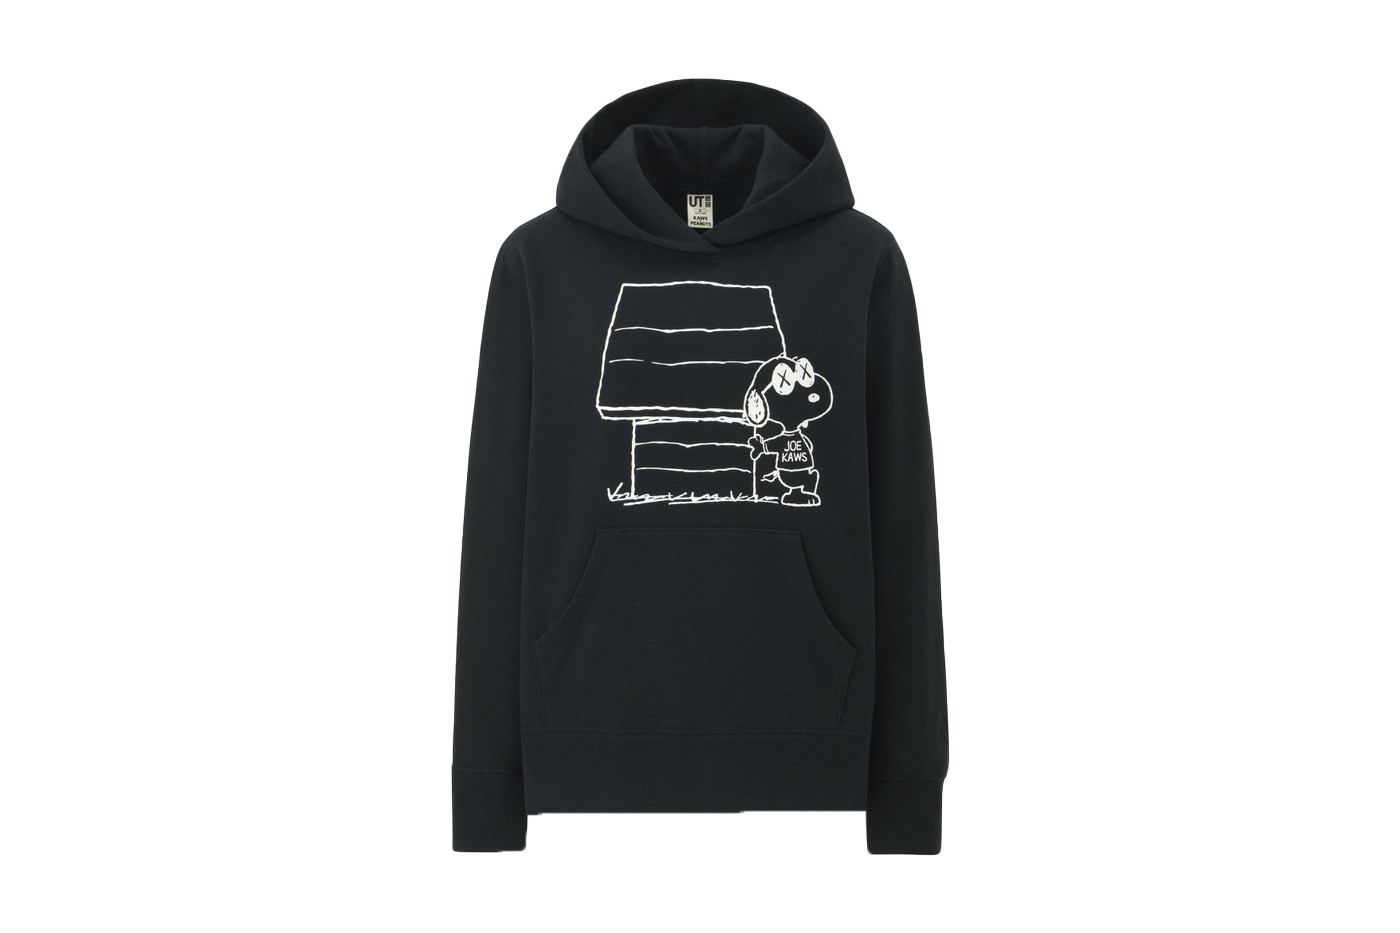 Kith for Peanuts Doghouse Hoodie \